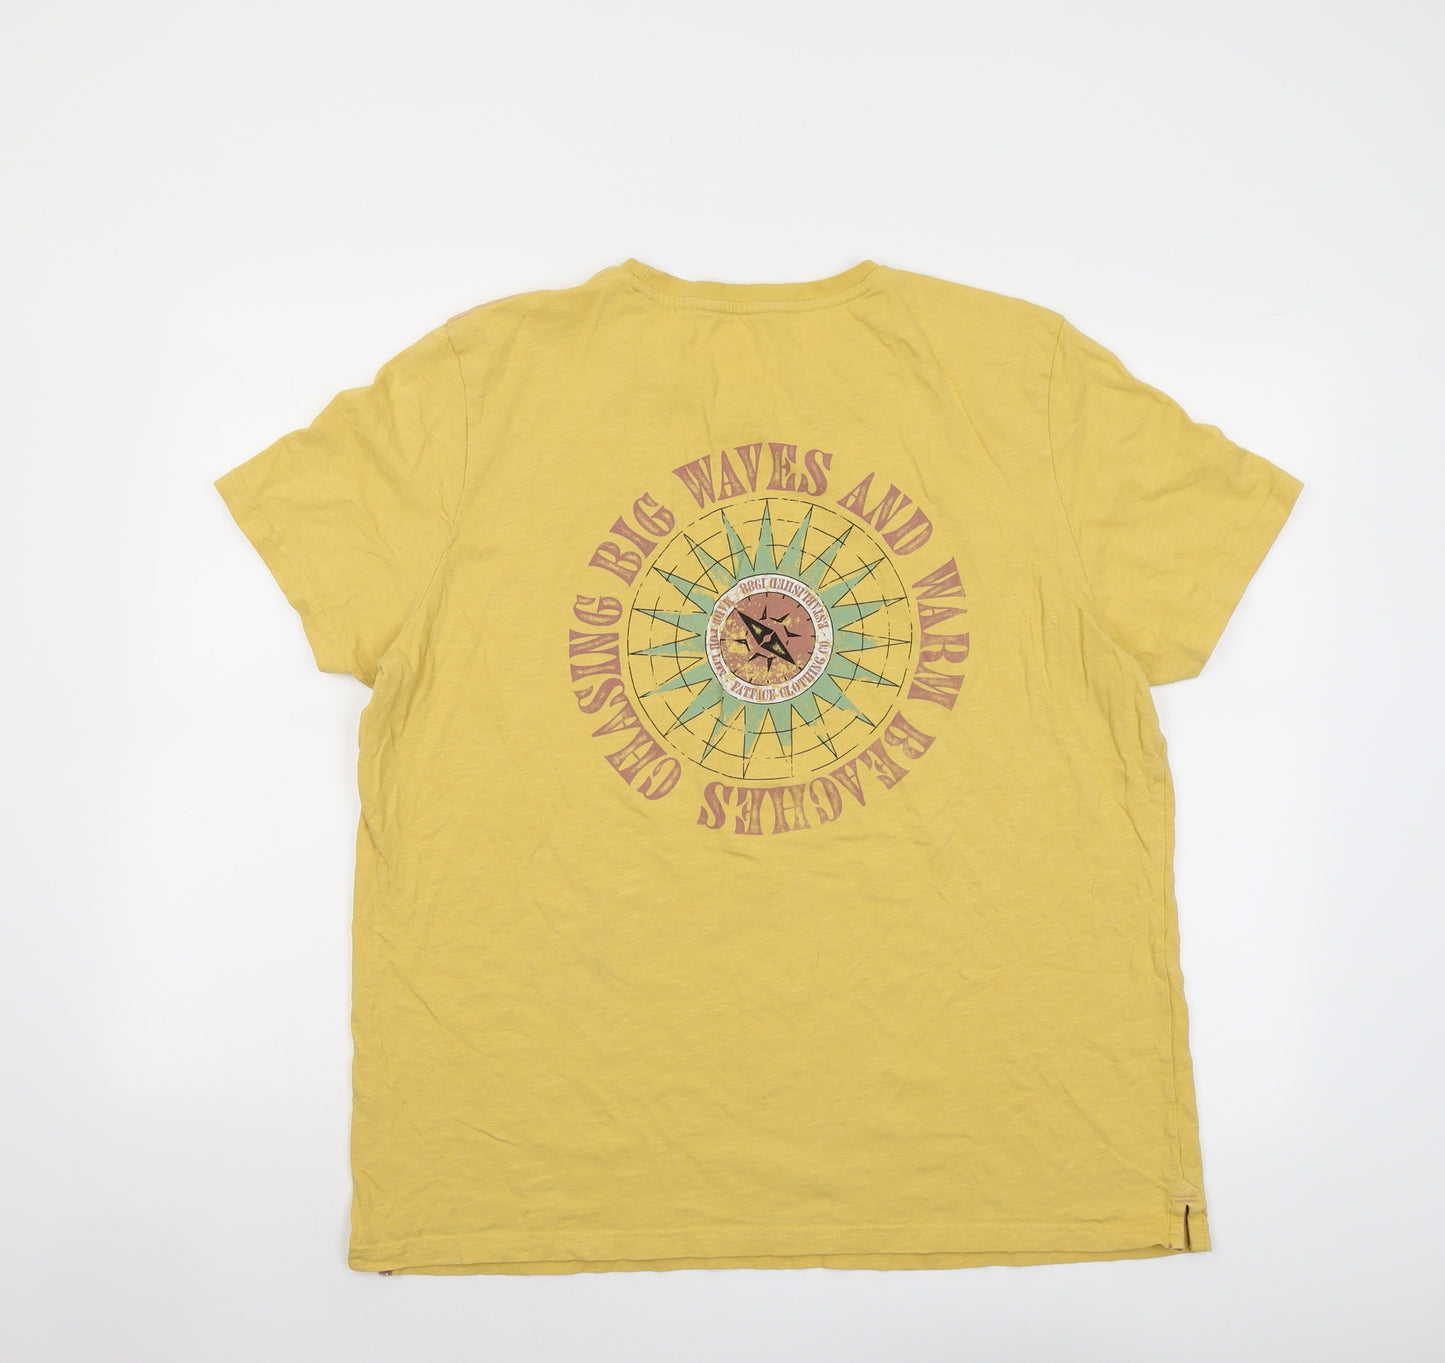 Fat Face Mens Yellow Cotton T-Shirt Size 2XL Round Neck